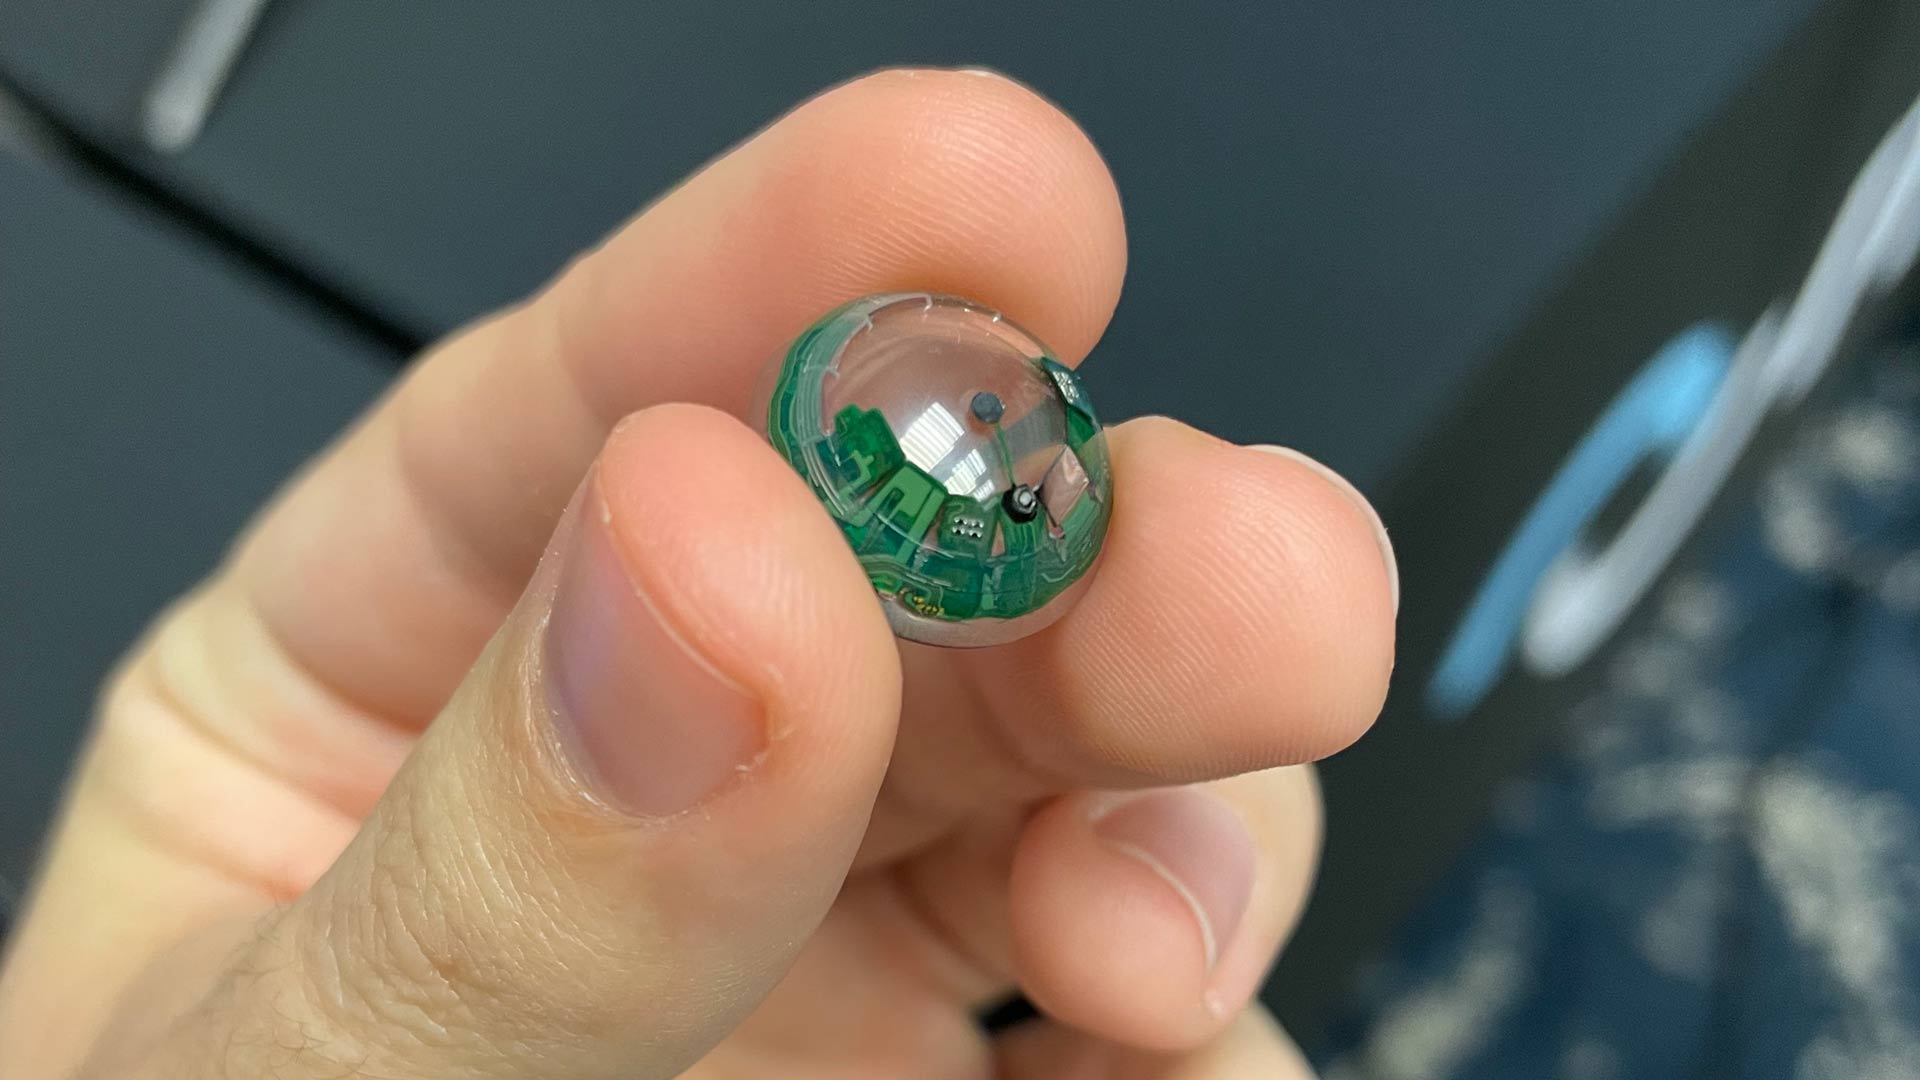 Mojo Vision’s Smart Contact Lens is Further Along Than You’d Think